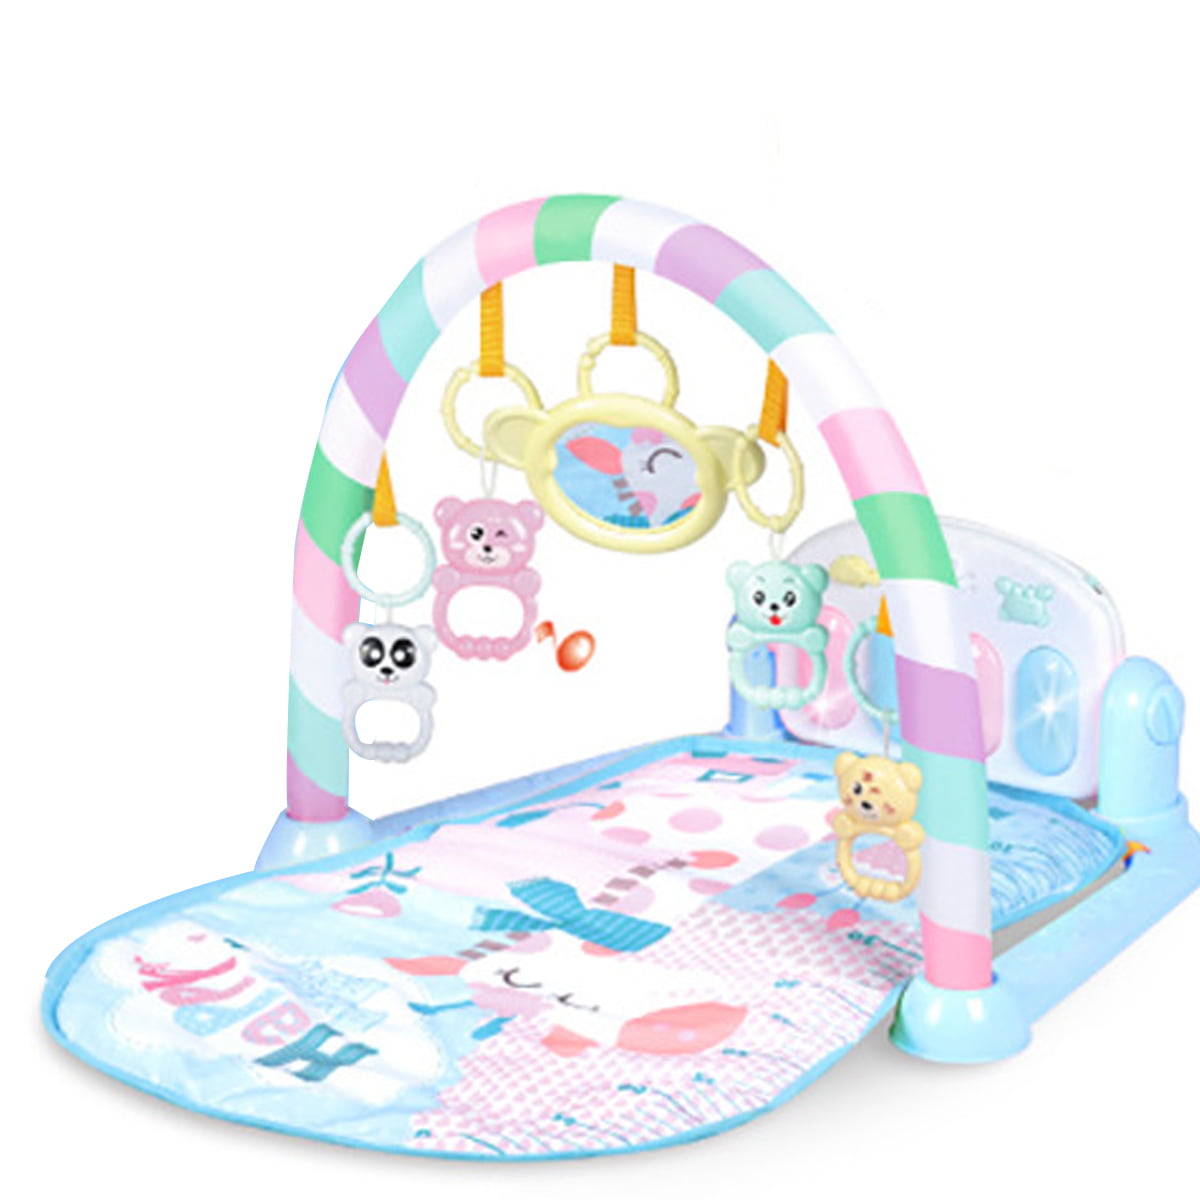 Kick and Play Newborn Mat with Detachable Piano Ideal for Baby Room 4 Rattle Pendants and 1 Mirror Pink Foot Gym Carpet Piano Fitness Rack BABY JOY Baby Play Mat Explore Activity Musical Gym 